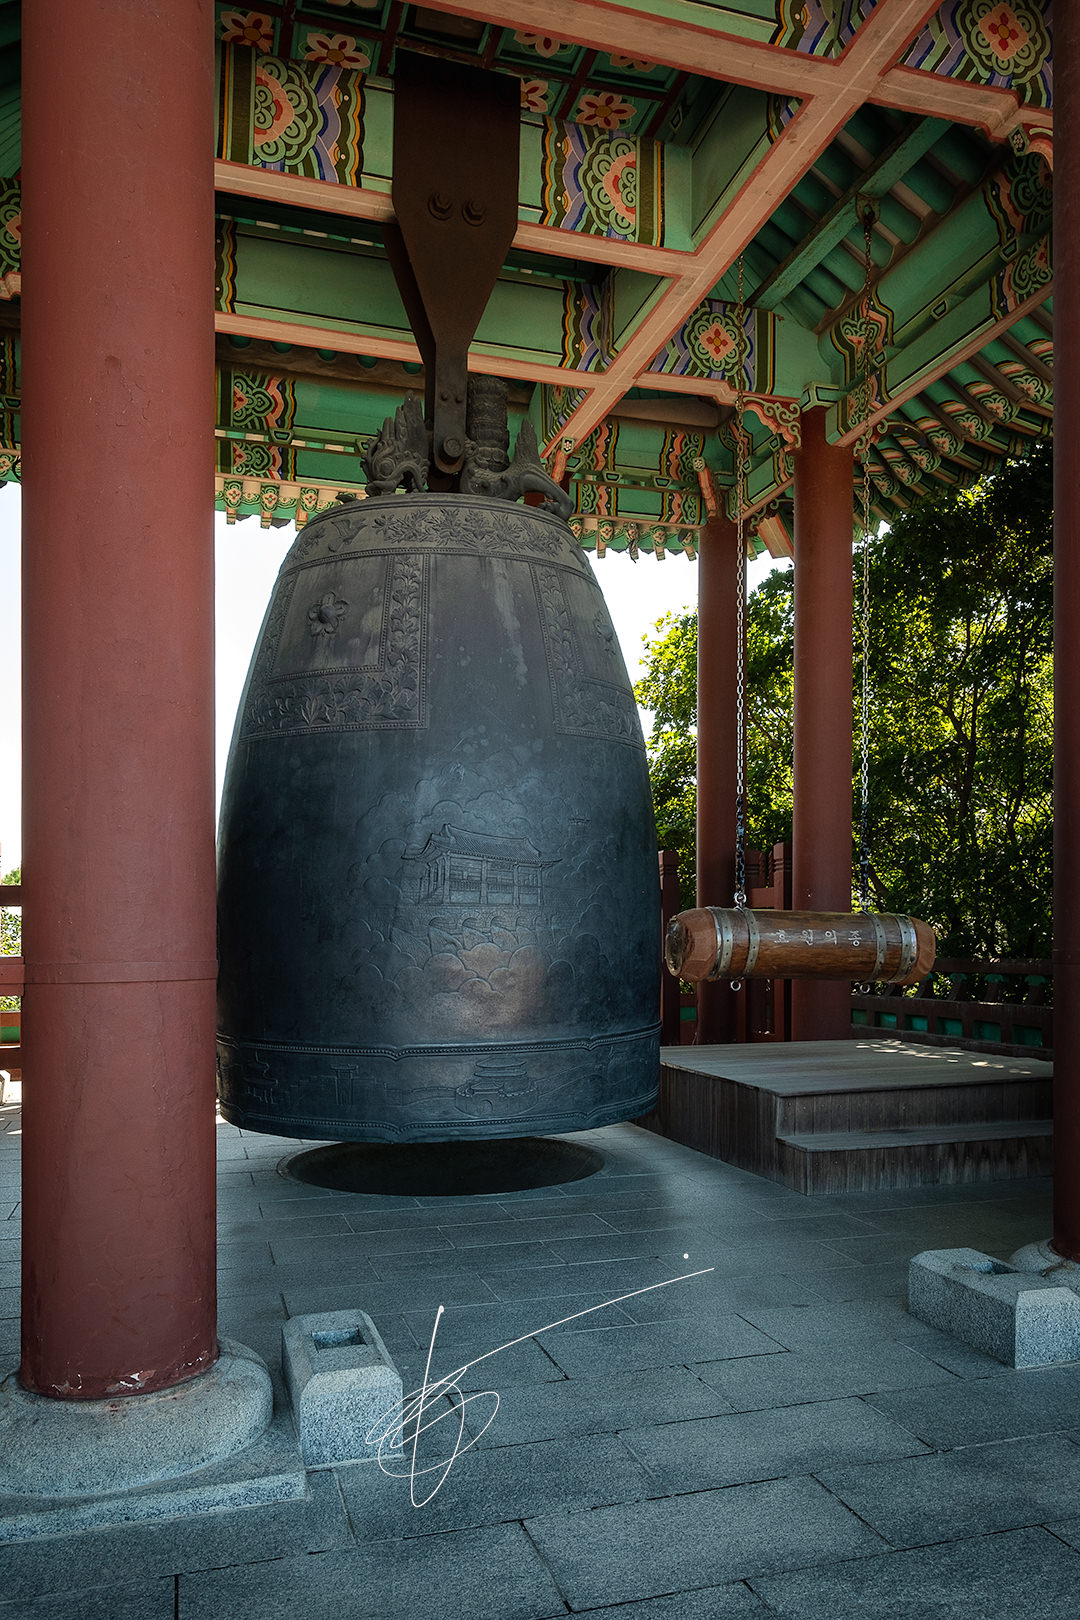 The religious bell in Suwon fortress